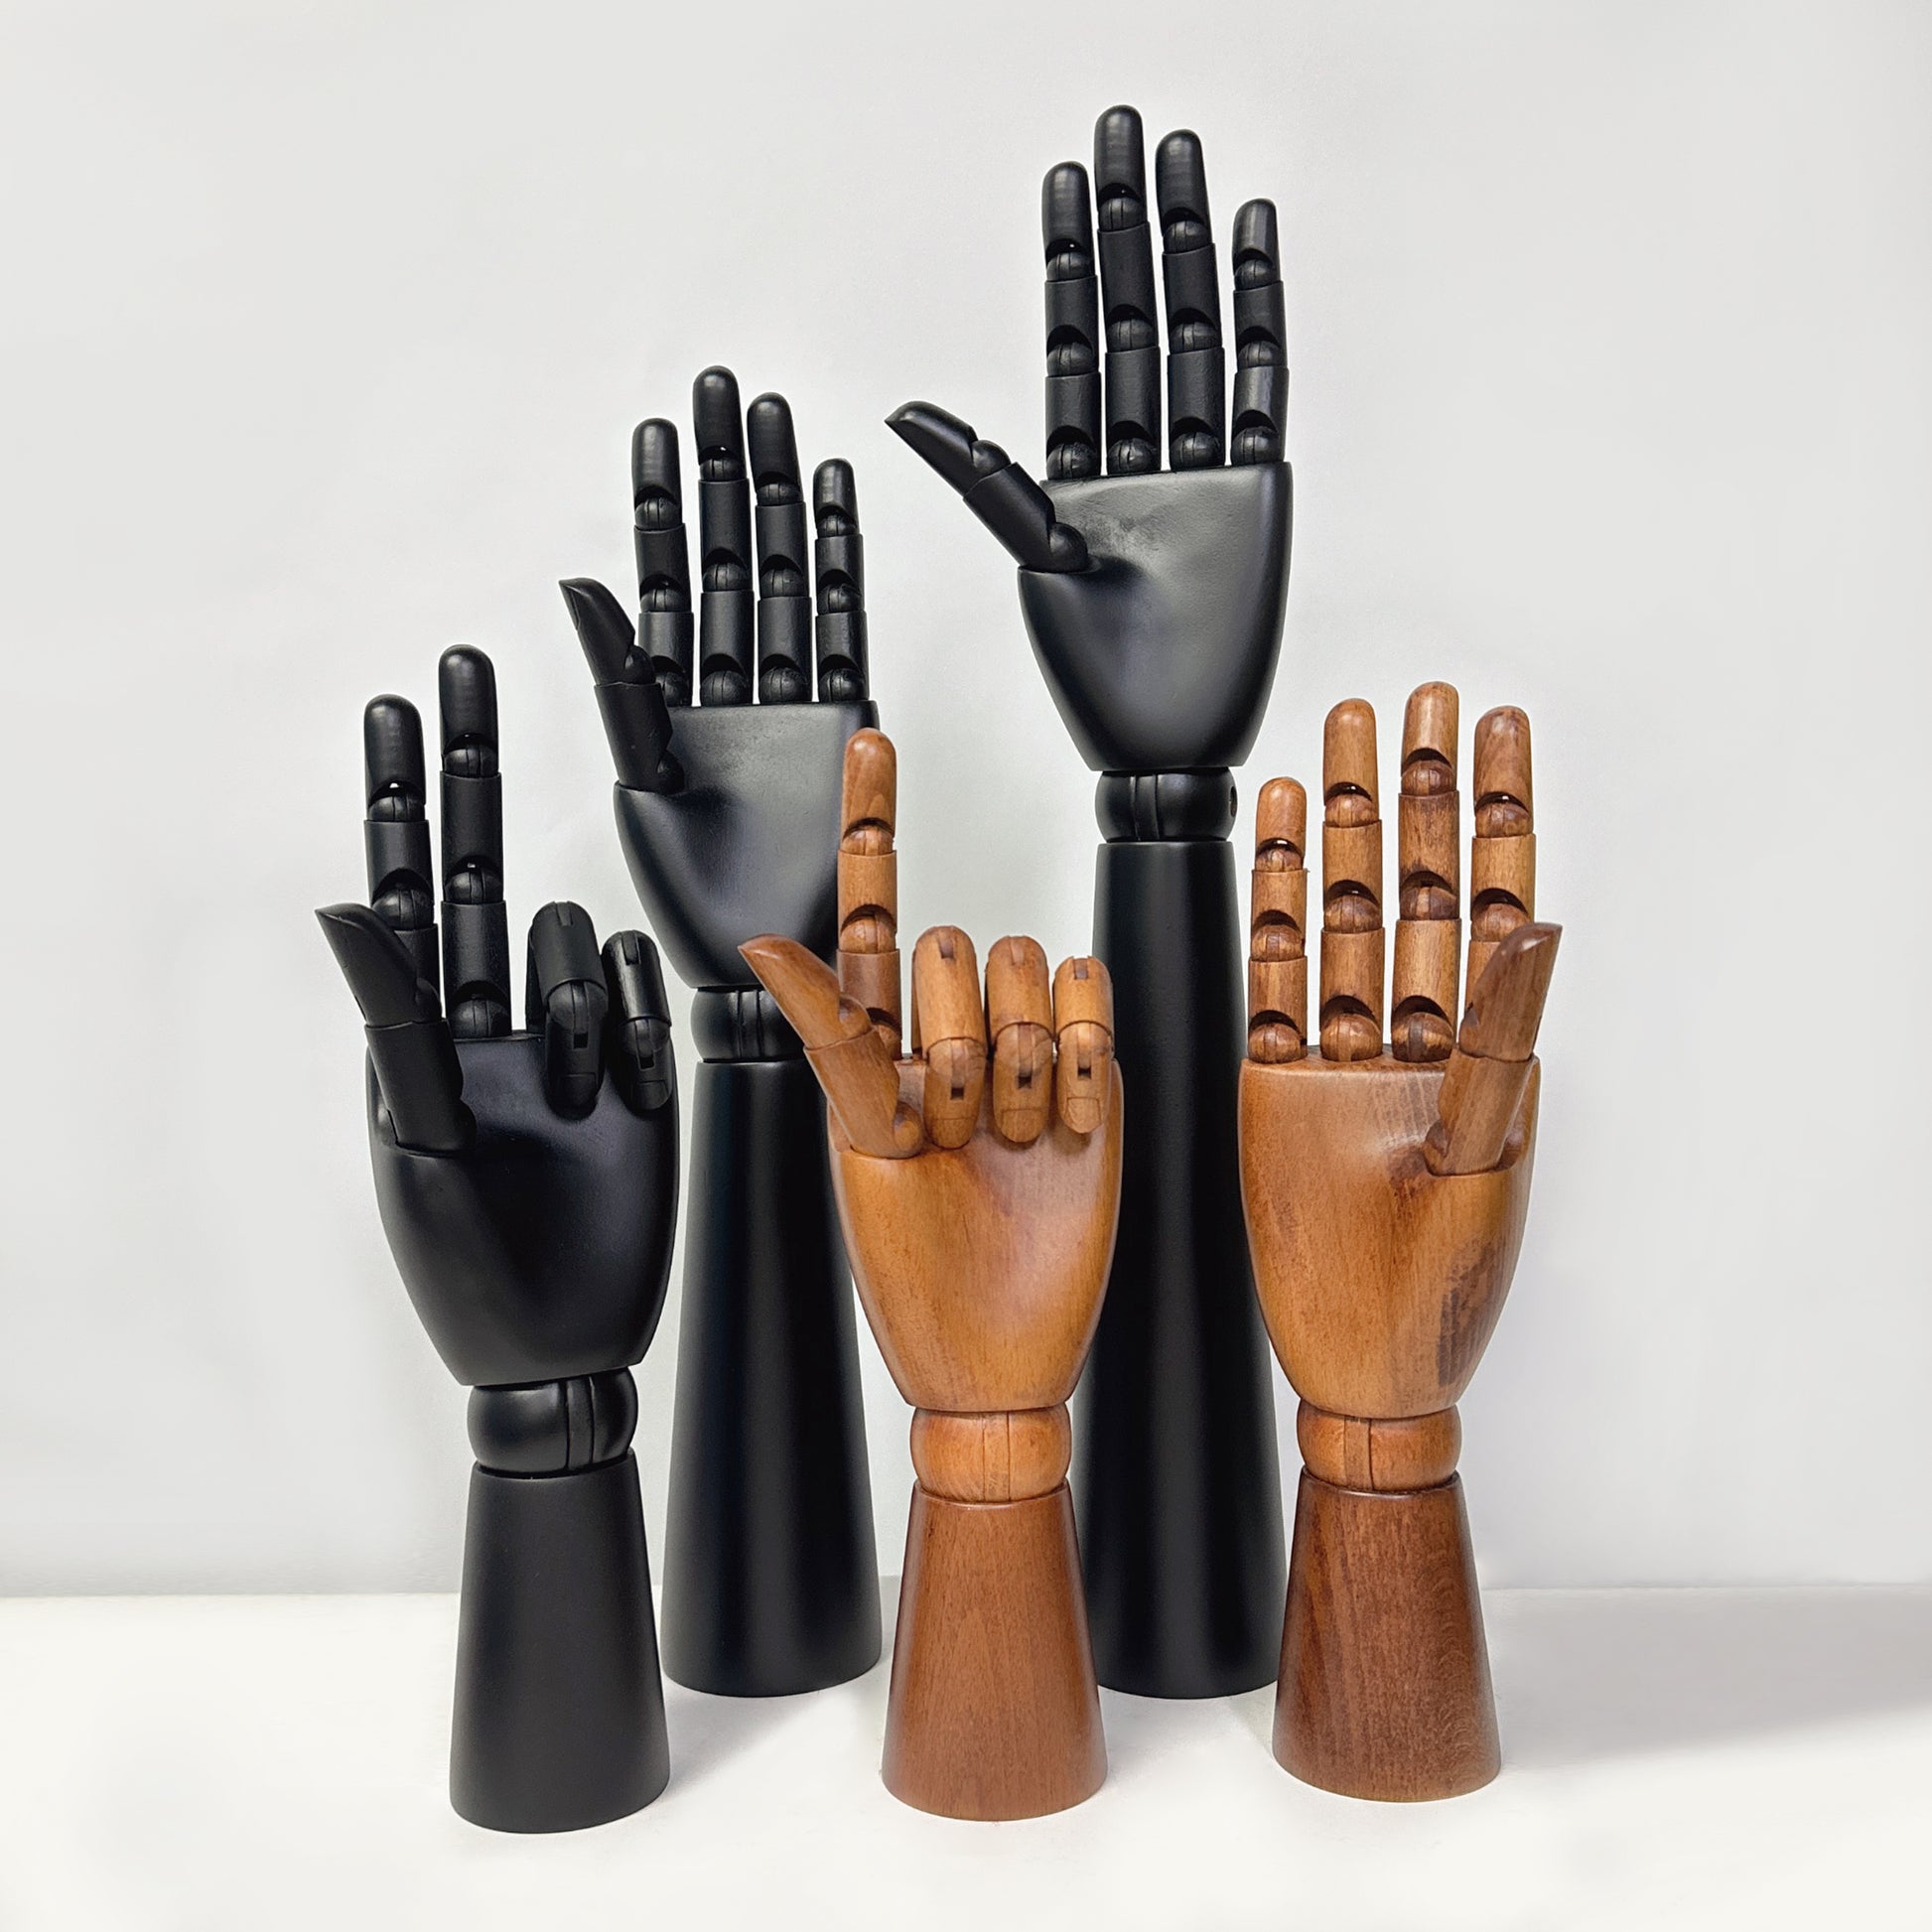 High Quality Matte Black Wooden Hand Mannequin Display, Female Wood Manikin Hand Dress Form Torso,Jewelry Display Flexiable Arm, 27/37/43cm DE-LIANG